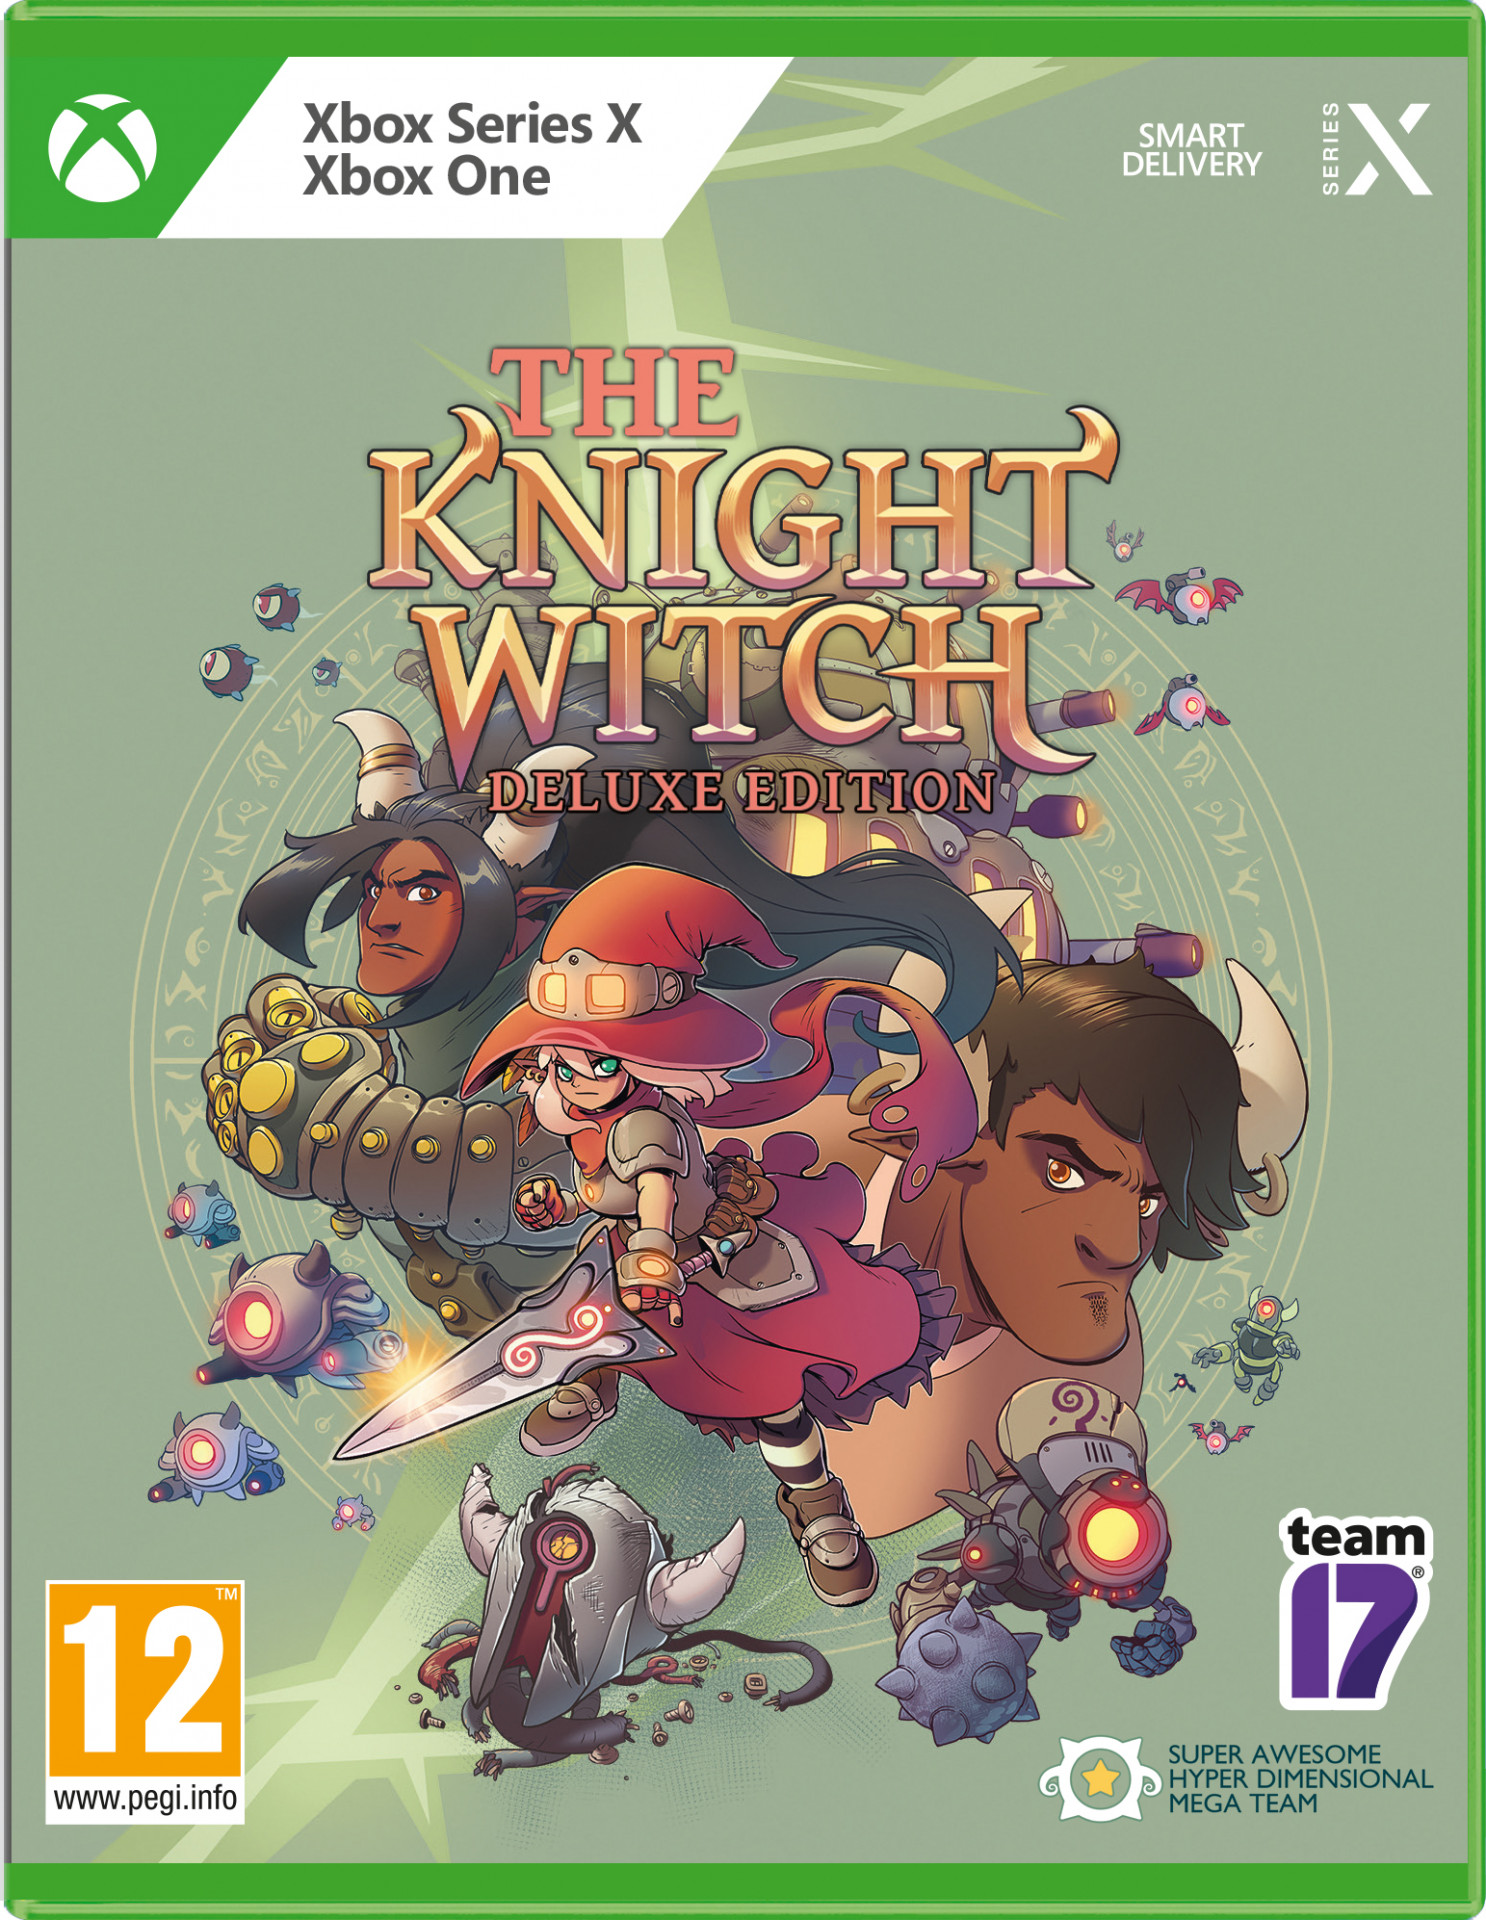 The Knight Witch - Deluxe Edition (Xbox Series X), Team 17